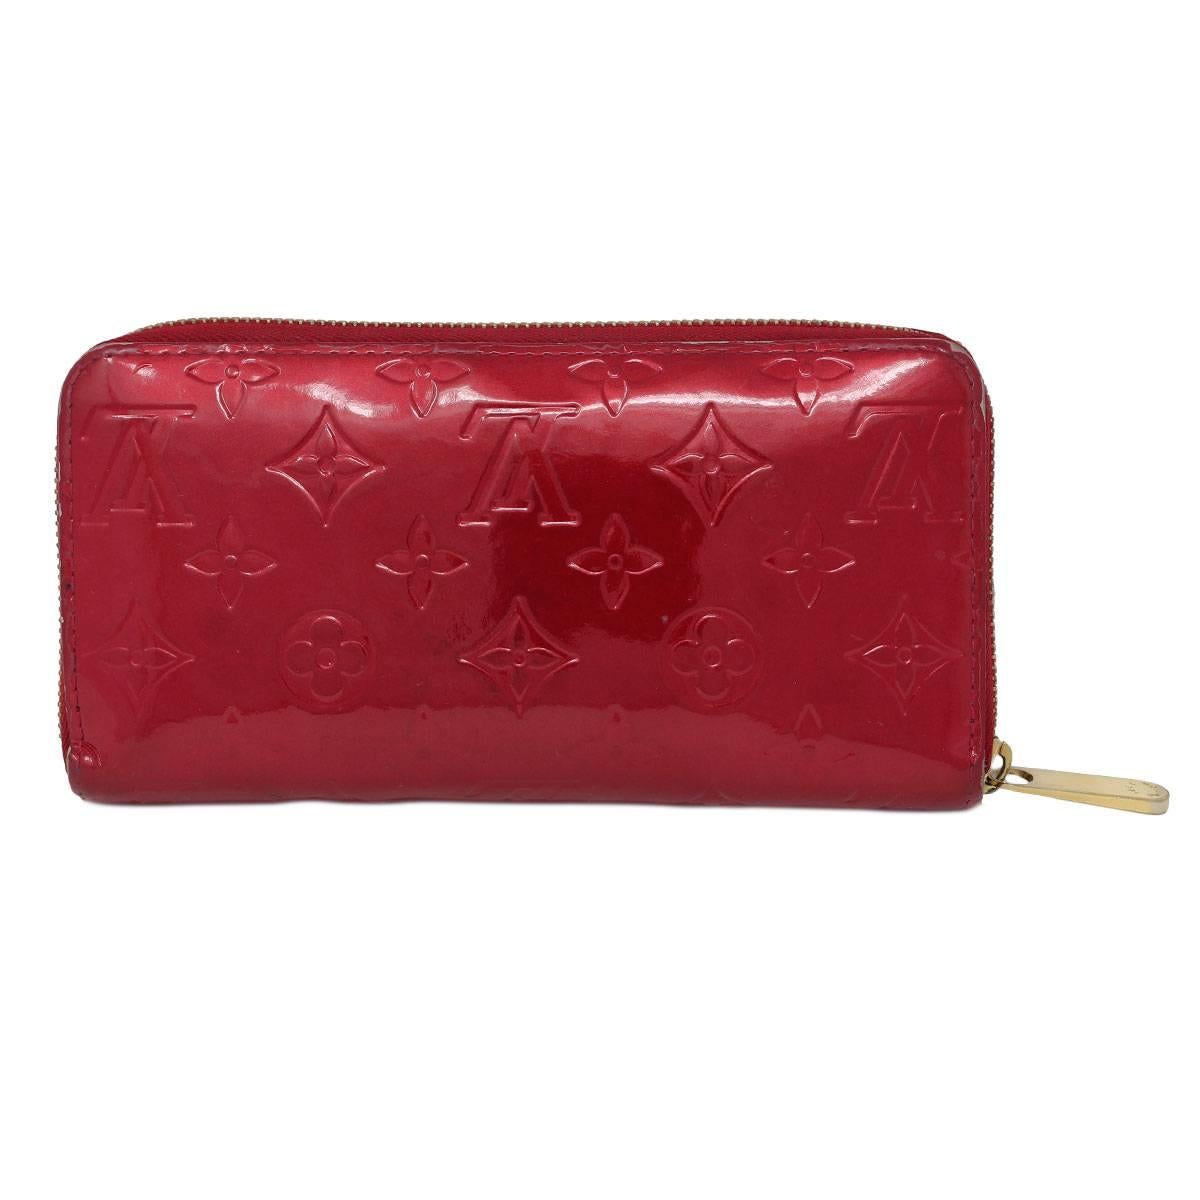 Brand: Louis Vuitton
Style: Zip Around Wallet
Measurements:  7.7 x 3.9 x 0.8
Materials: Red Vernis Leather
Hardware: Golden Brass Zipper
Interior Compartments: Comes with 8 Credit card slots, 1 Zippered Coin Pocket, 2 Large Gusseted Compartments, 2